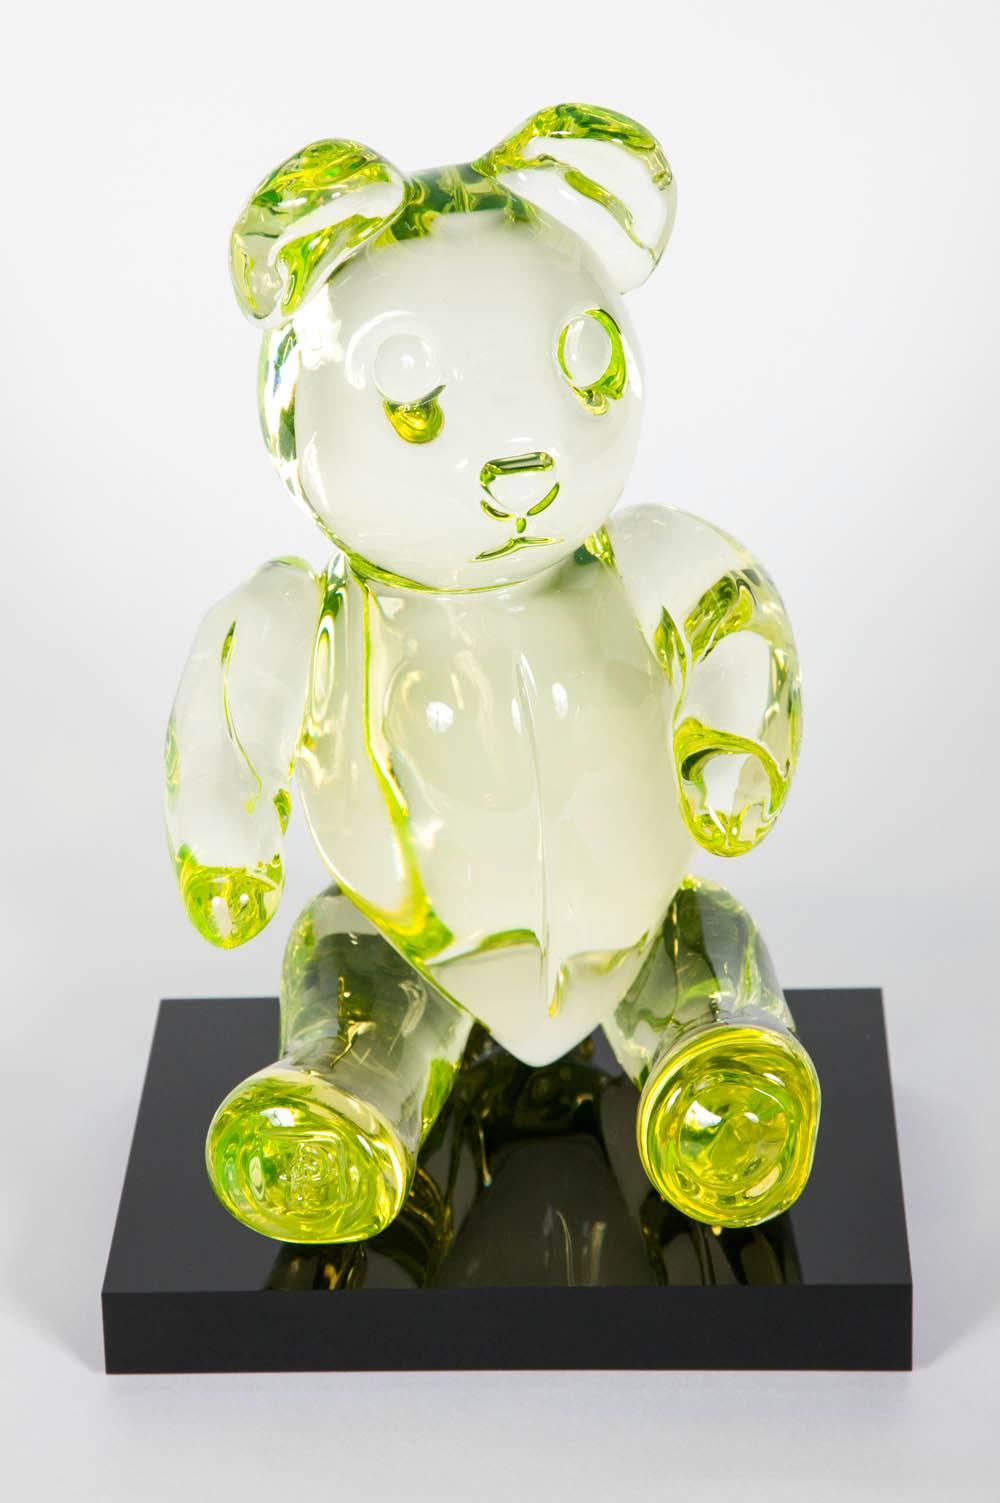 Hand-Crafted Bear, a unique lime green glass sculpted animal figurine by Elliot Walker